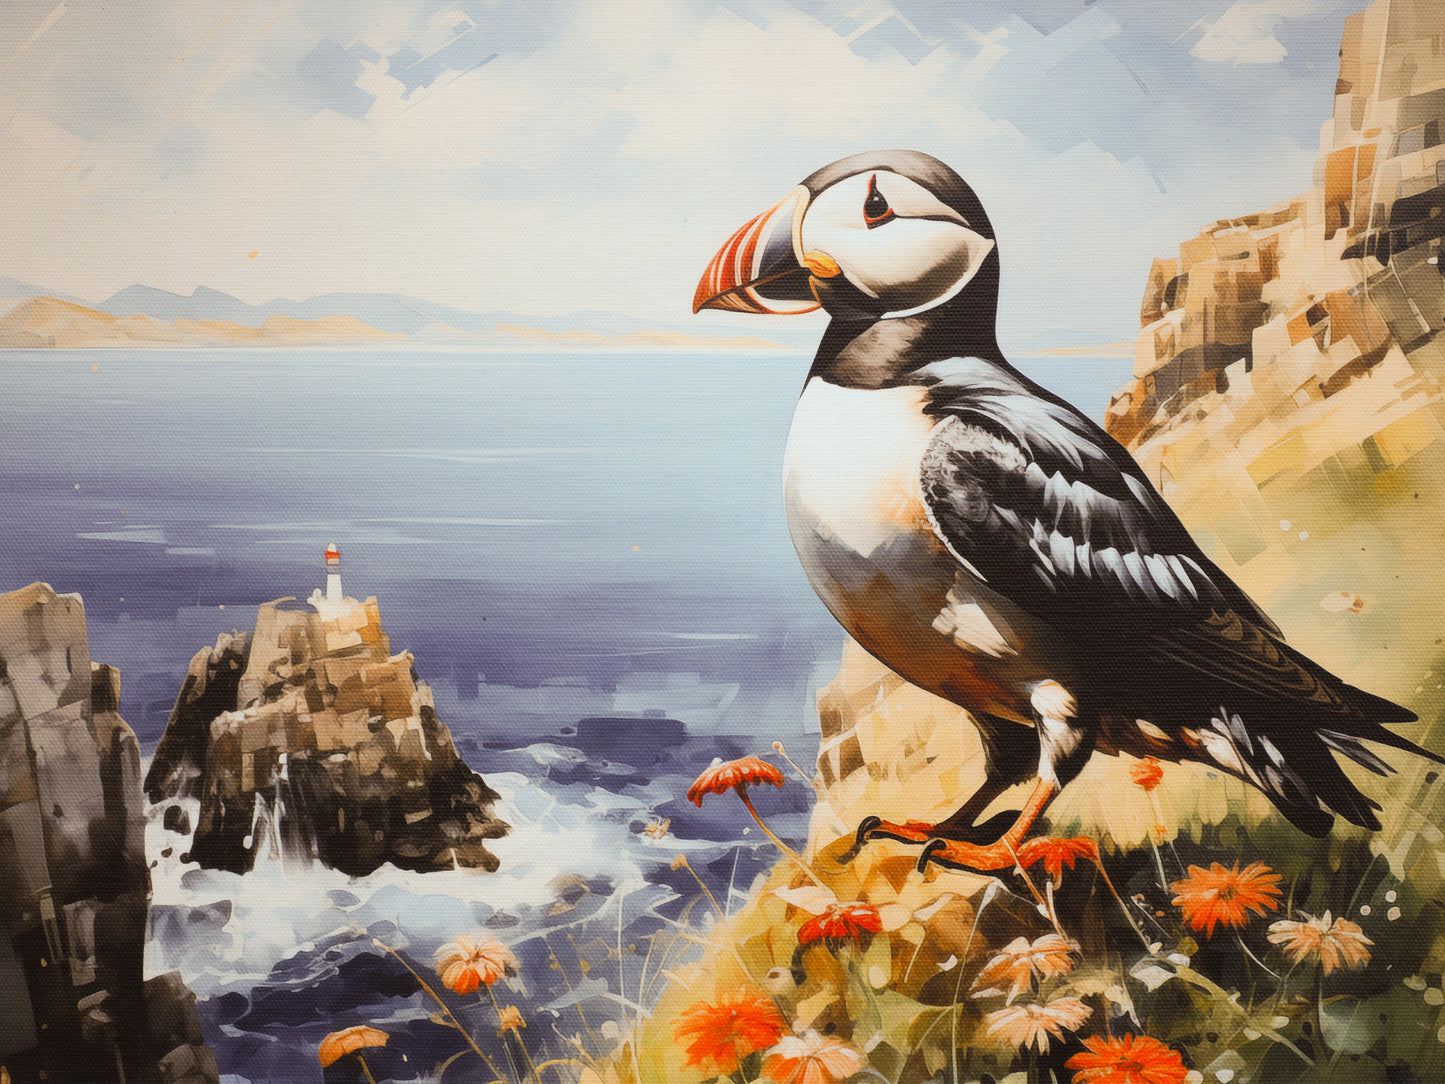 The picture shows the canvas Puffin Art with the Puffin standing on a sea cliff.print 